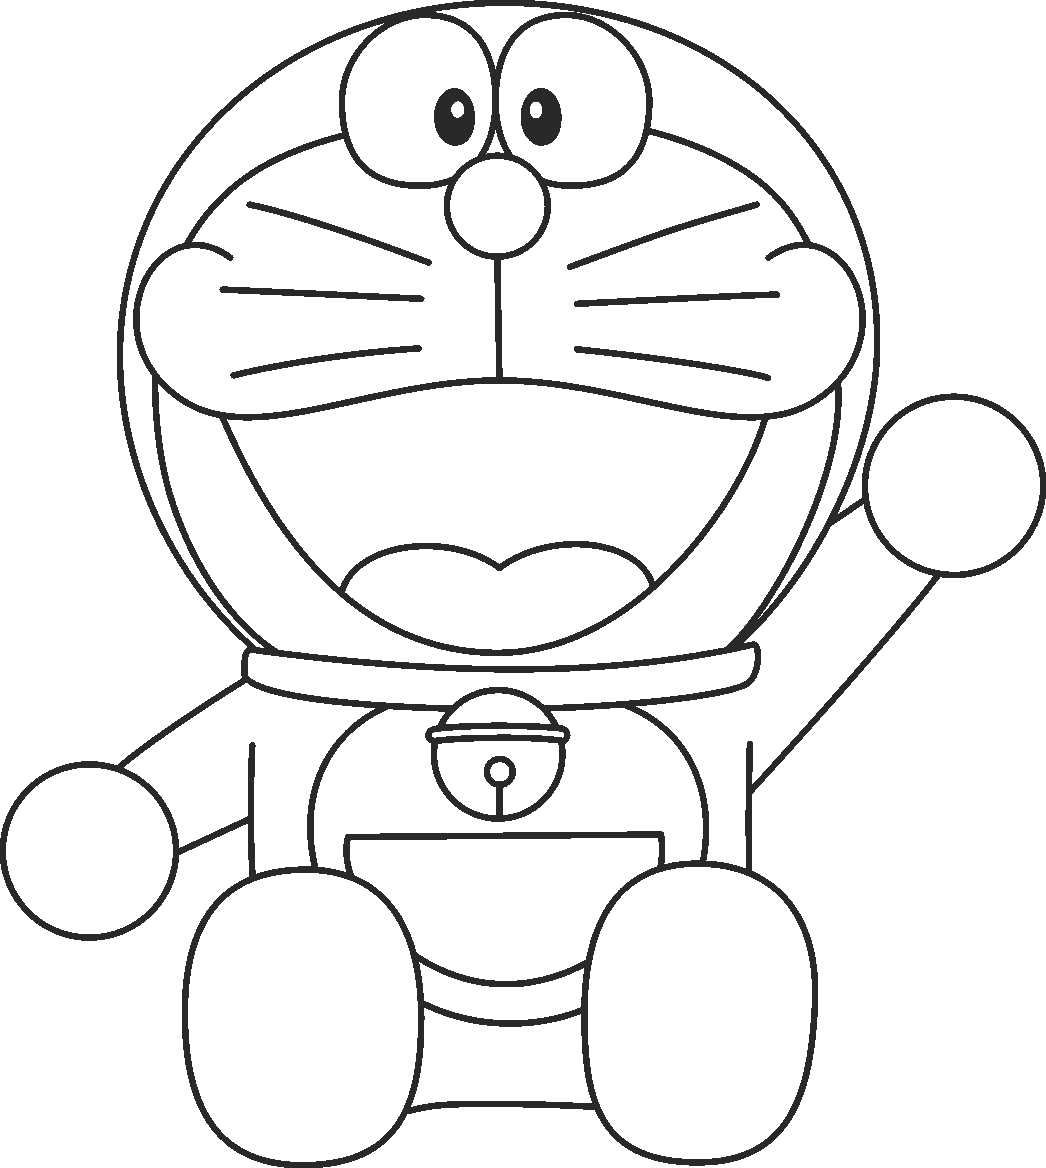 Free Coloring Pages For Kids: Coloring Doraemon